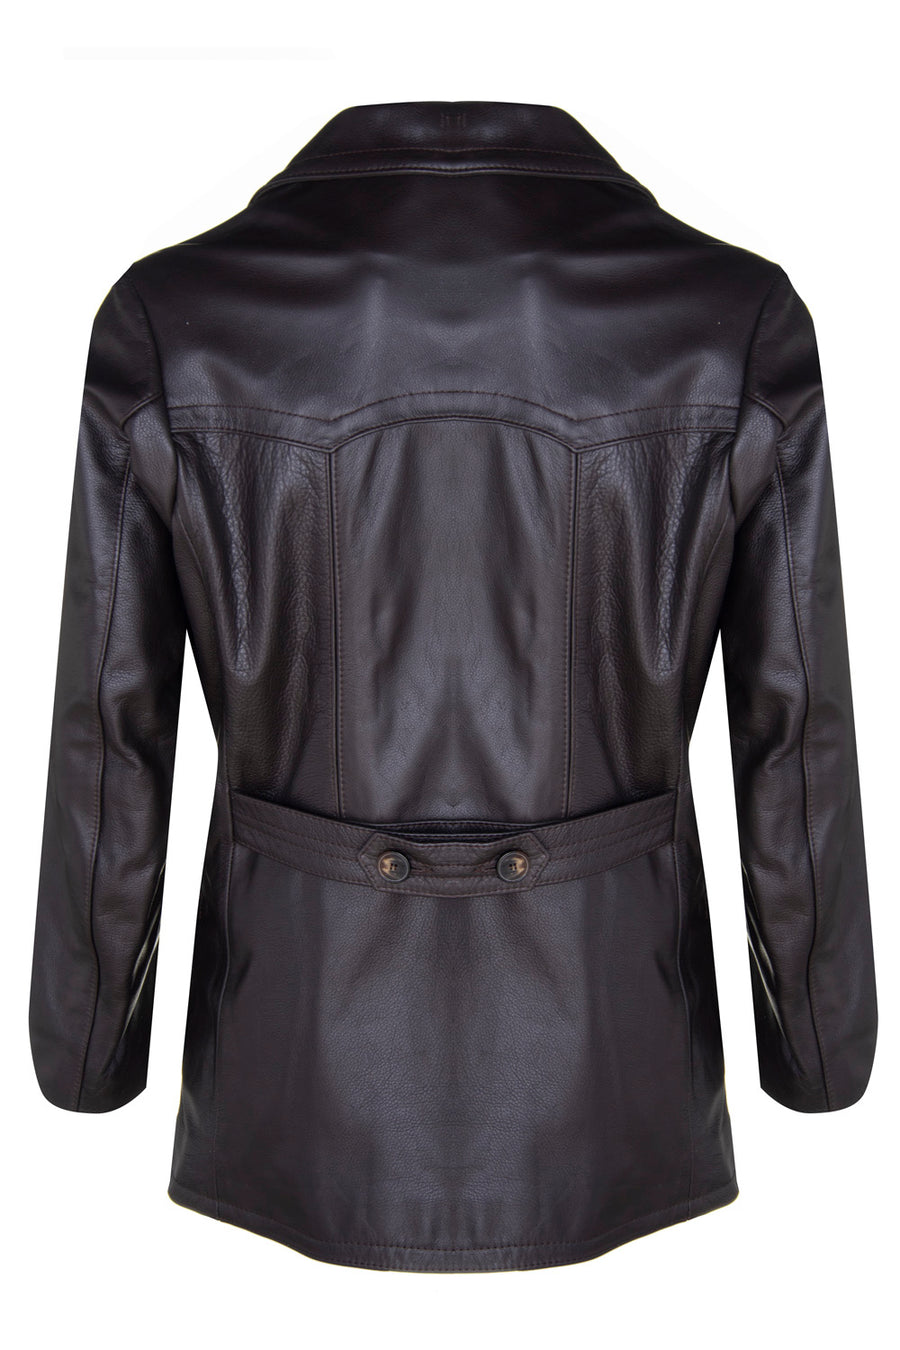 German U Boat Jacket as used in Dr Who – Wested Leather Co